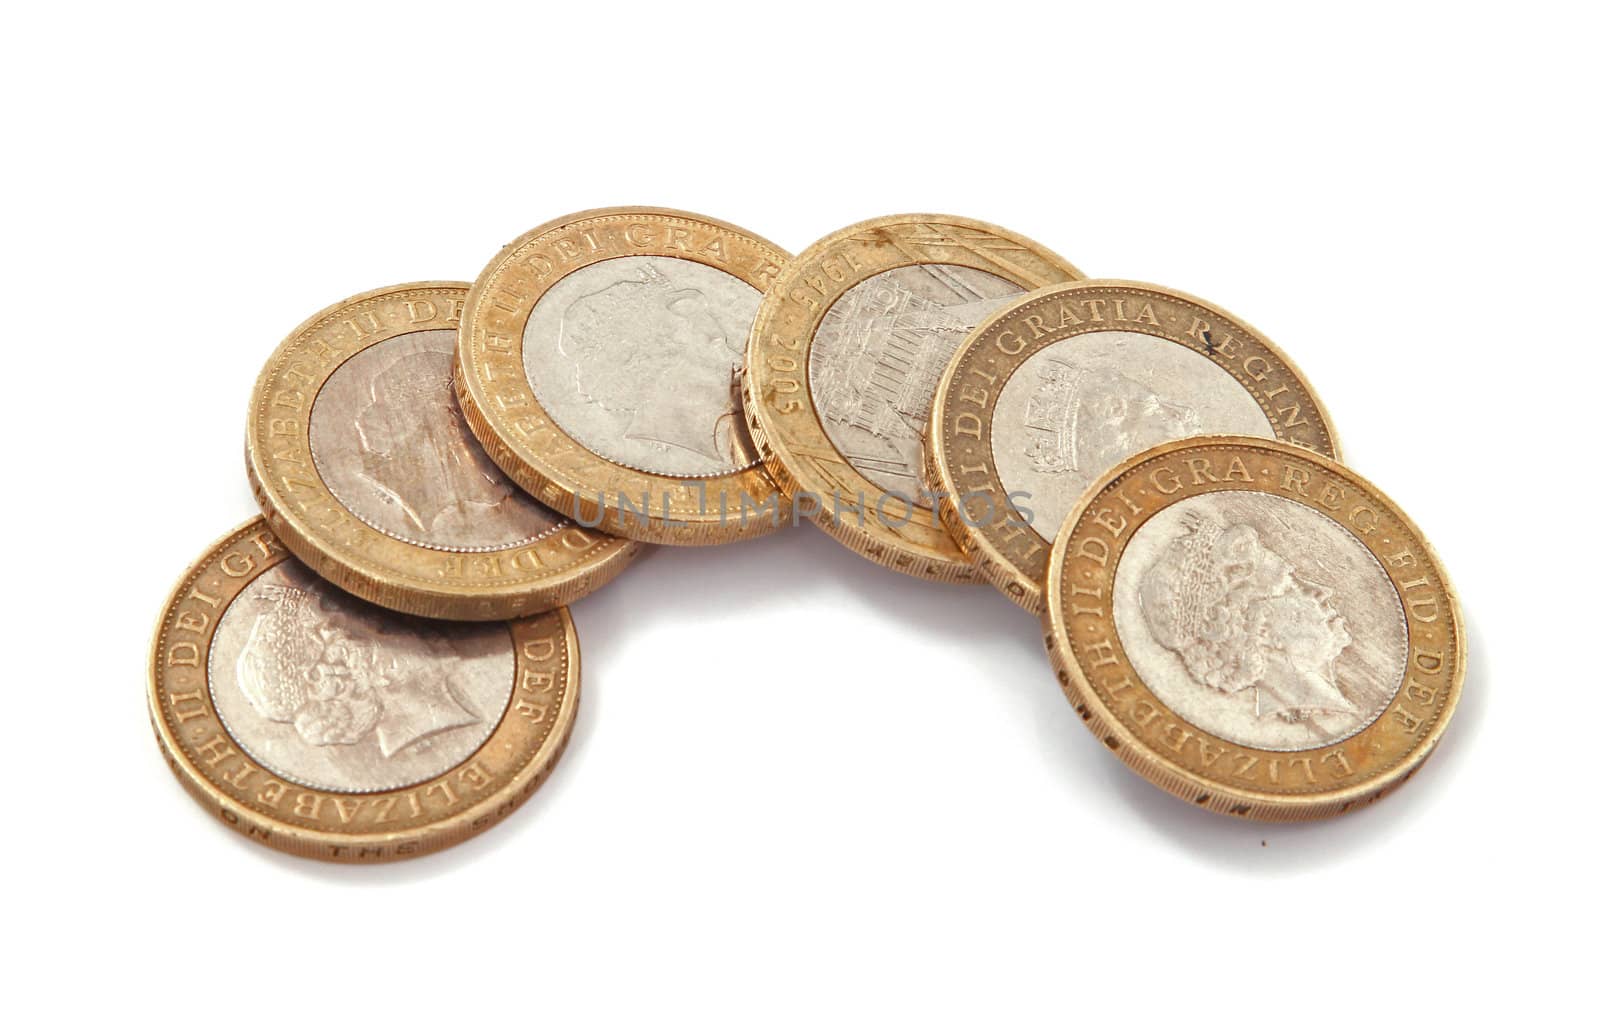 British, UK, two pound coins on a plain white background.